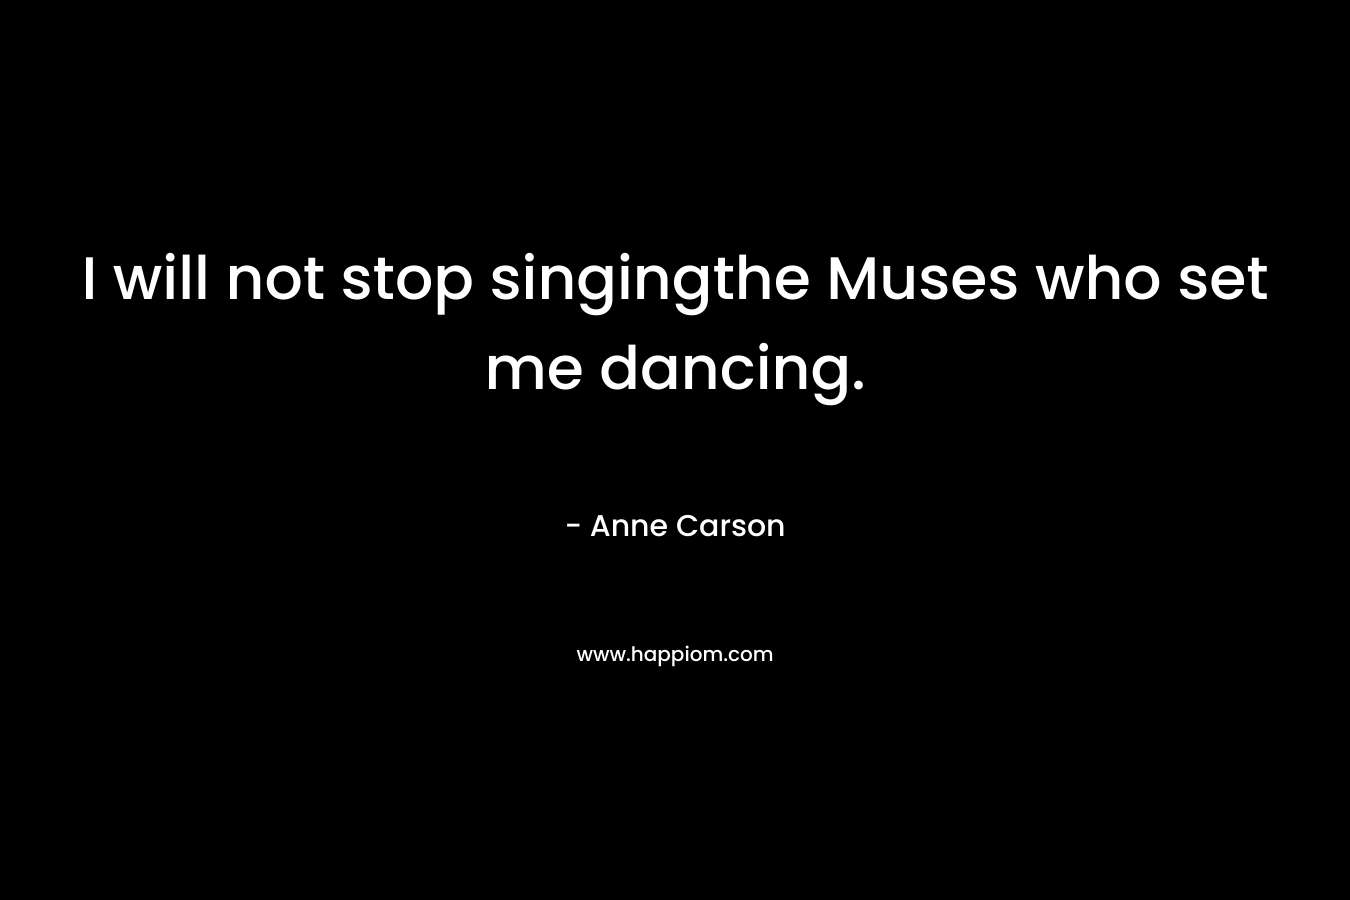 I will not stop singingthe Muses who set me dancing.